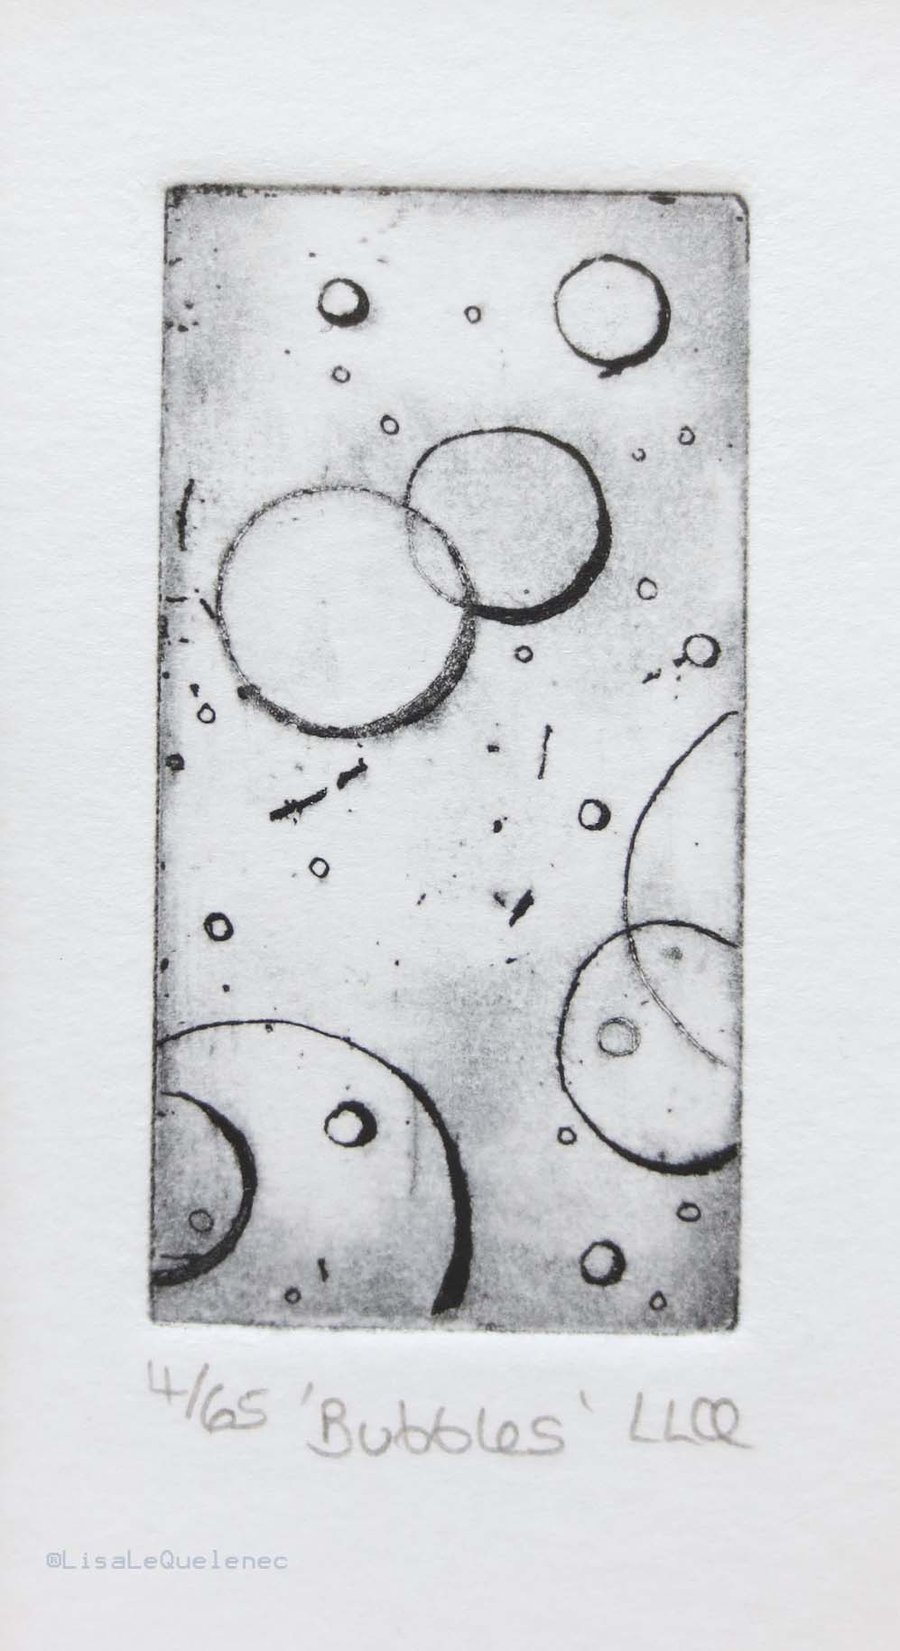 Original etching print bubbles no.4 of 65 limted edition